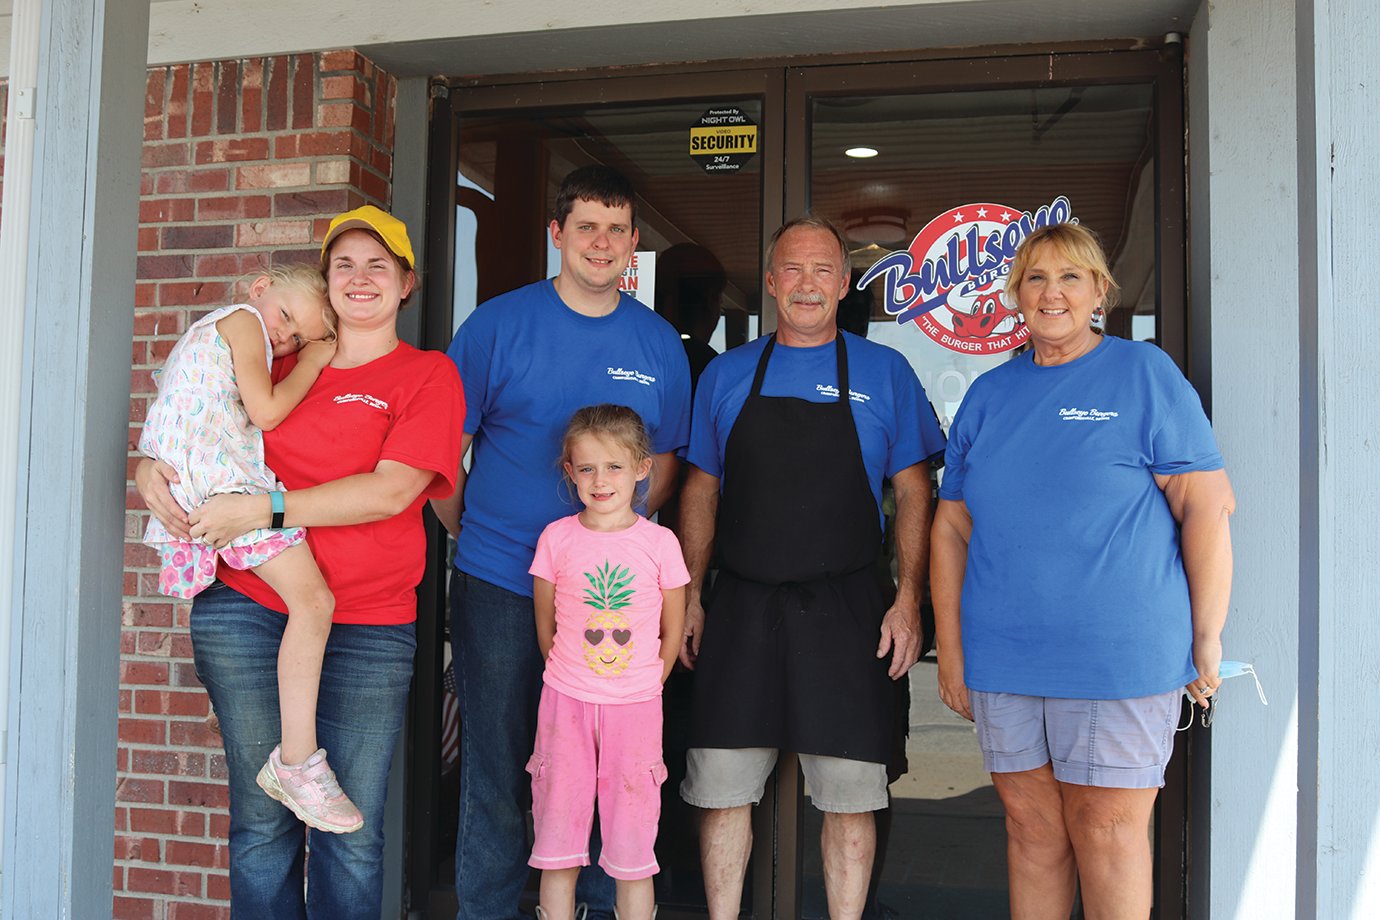 The Bullseye Burgers family stands tall outside the new restaurant on Darlington Avenue. The family includes Vera Carrell, from left, Lagora Carrell, Craig Carrell, Aaleeah Correll, Henry Carrell and Jeannie Thompson.